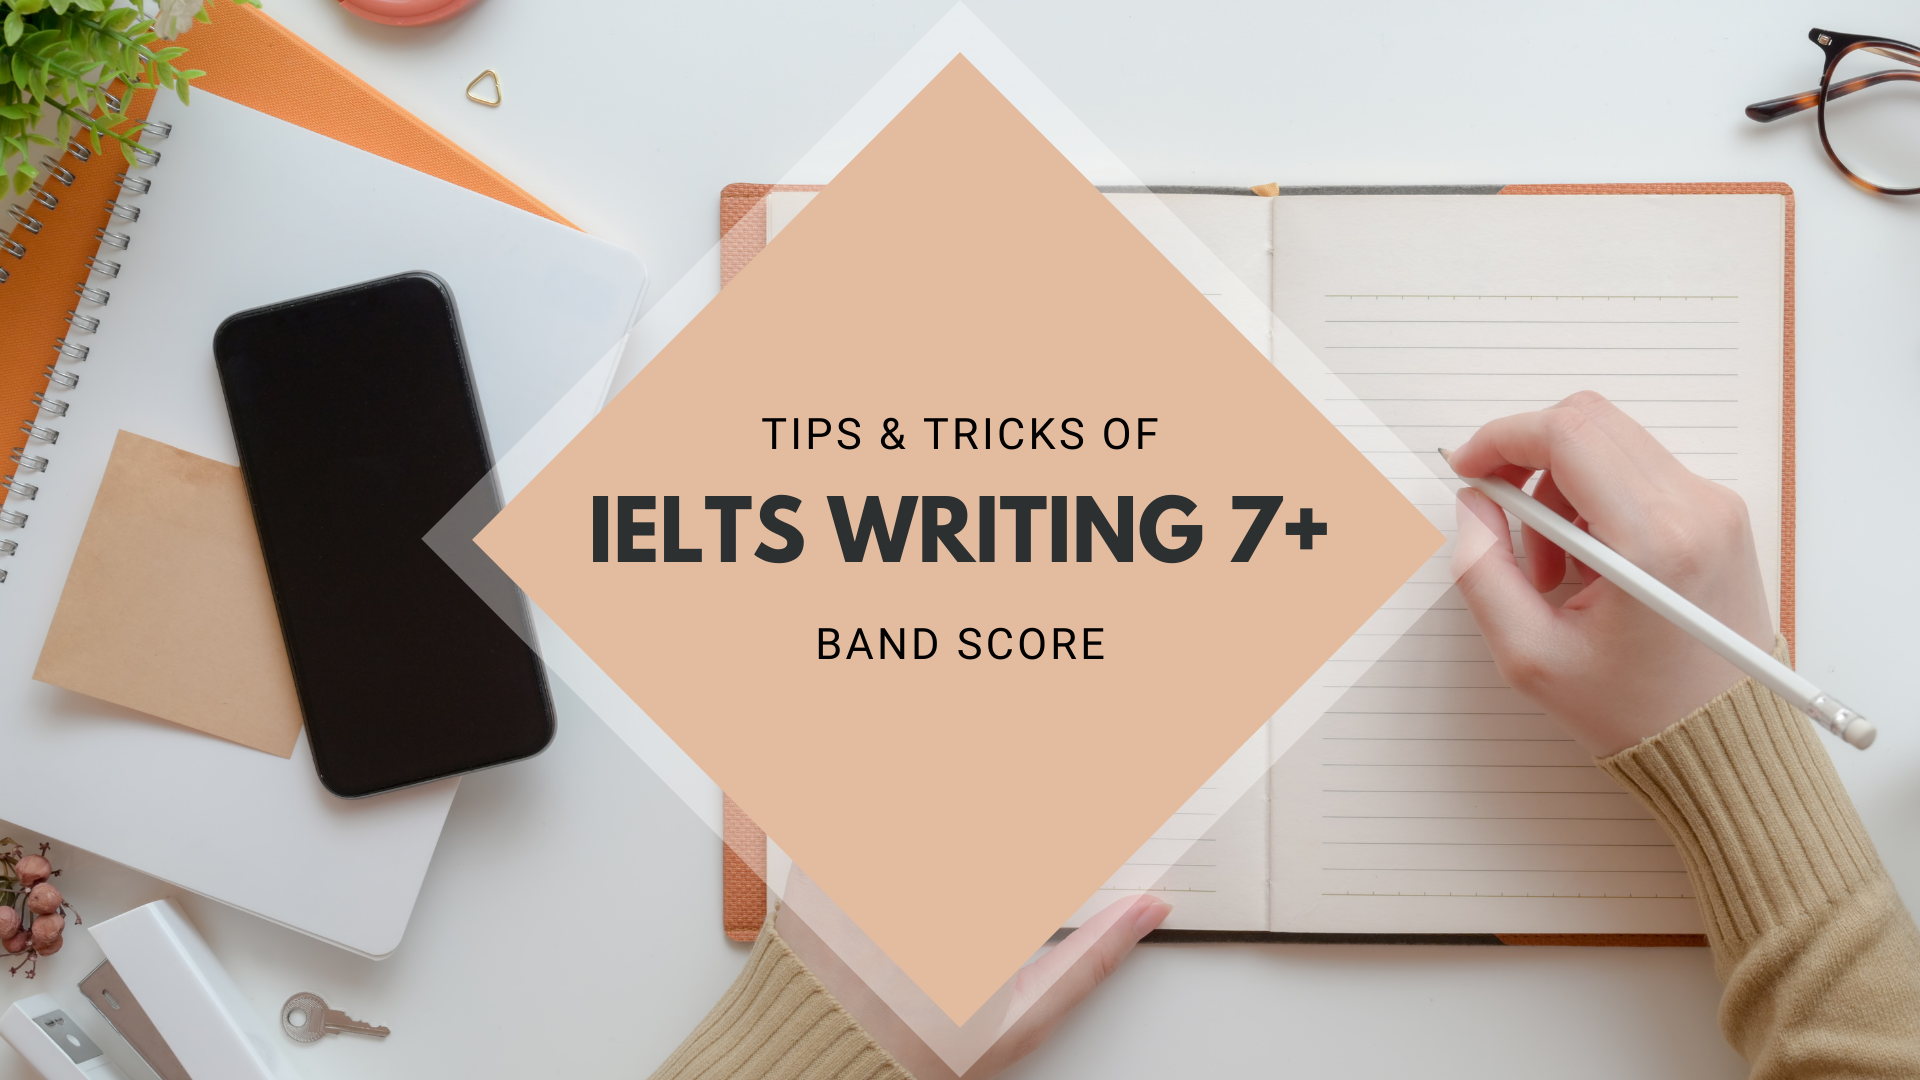 TIPS & TRICKS OF IELTS WRITING 7+ BAND SCORE Course Image